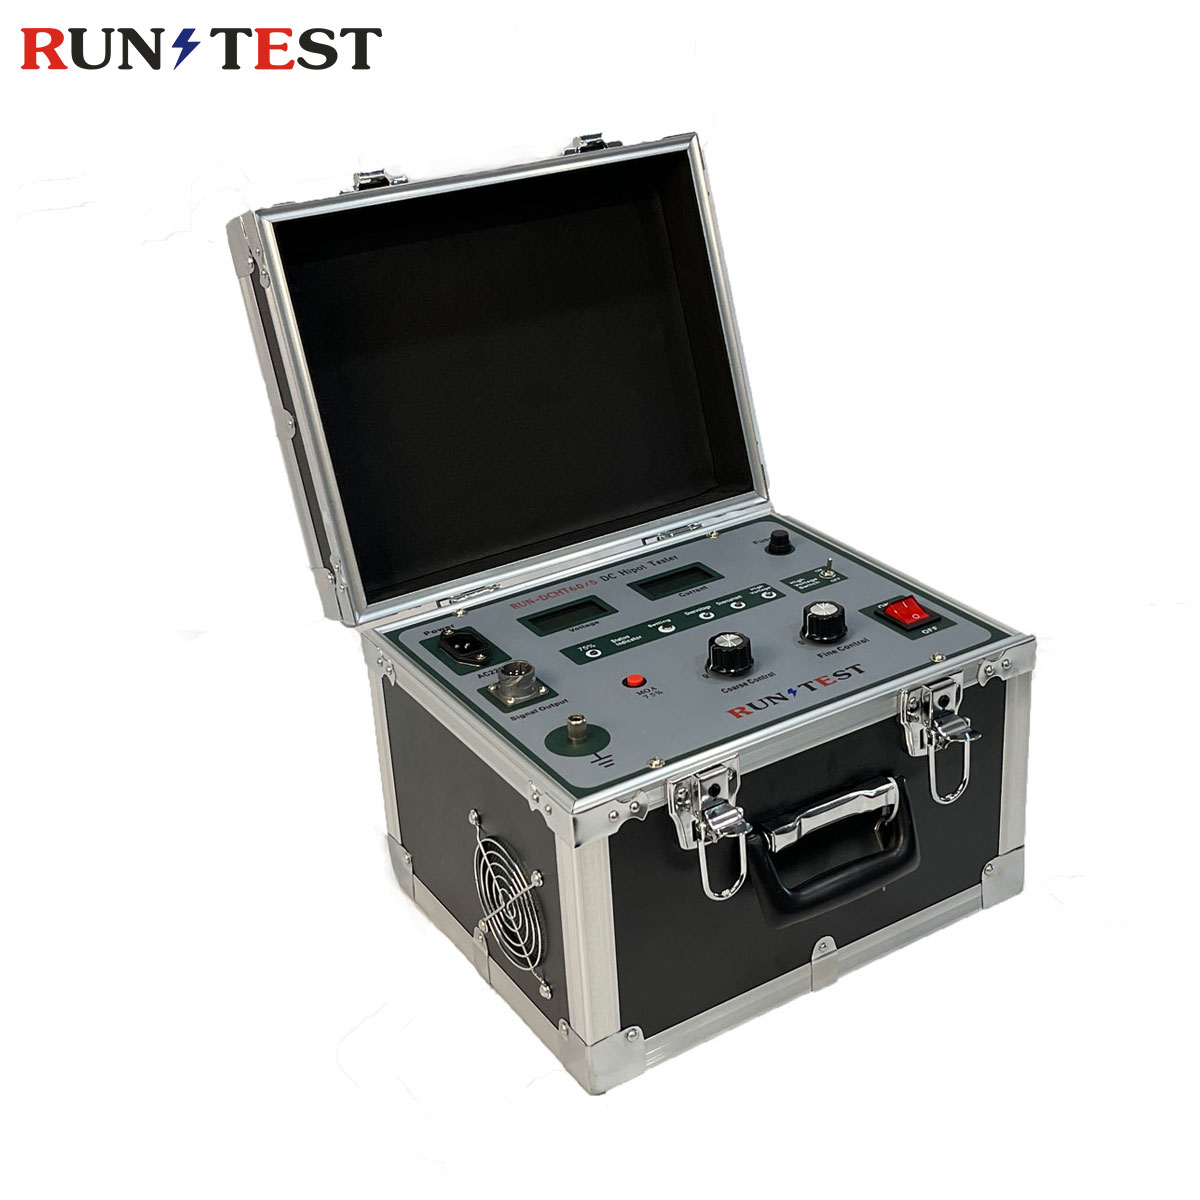 Electrical DC High Voltage Generator DC Hipot Tester Featured Image